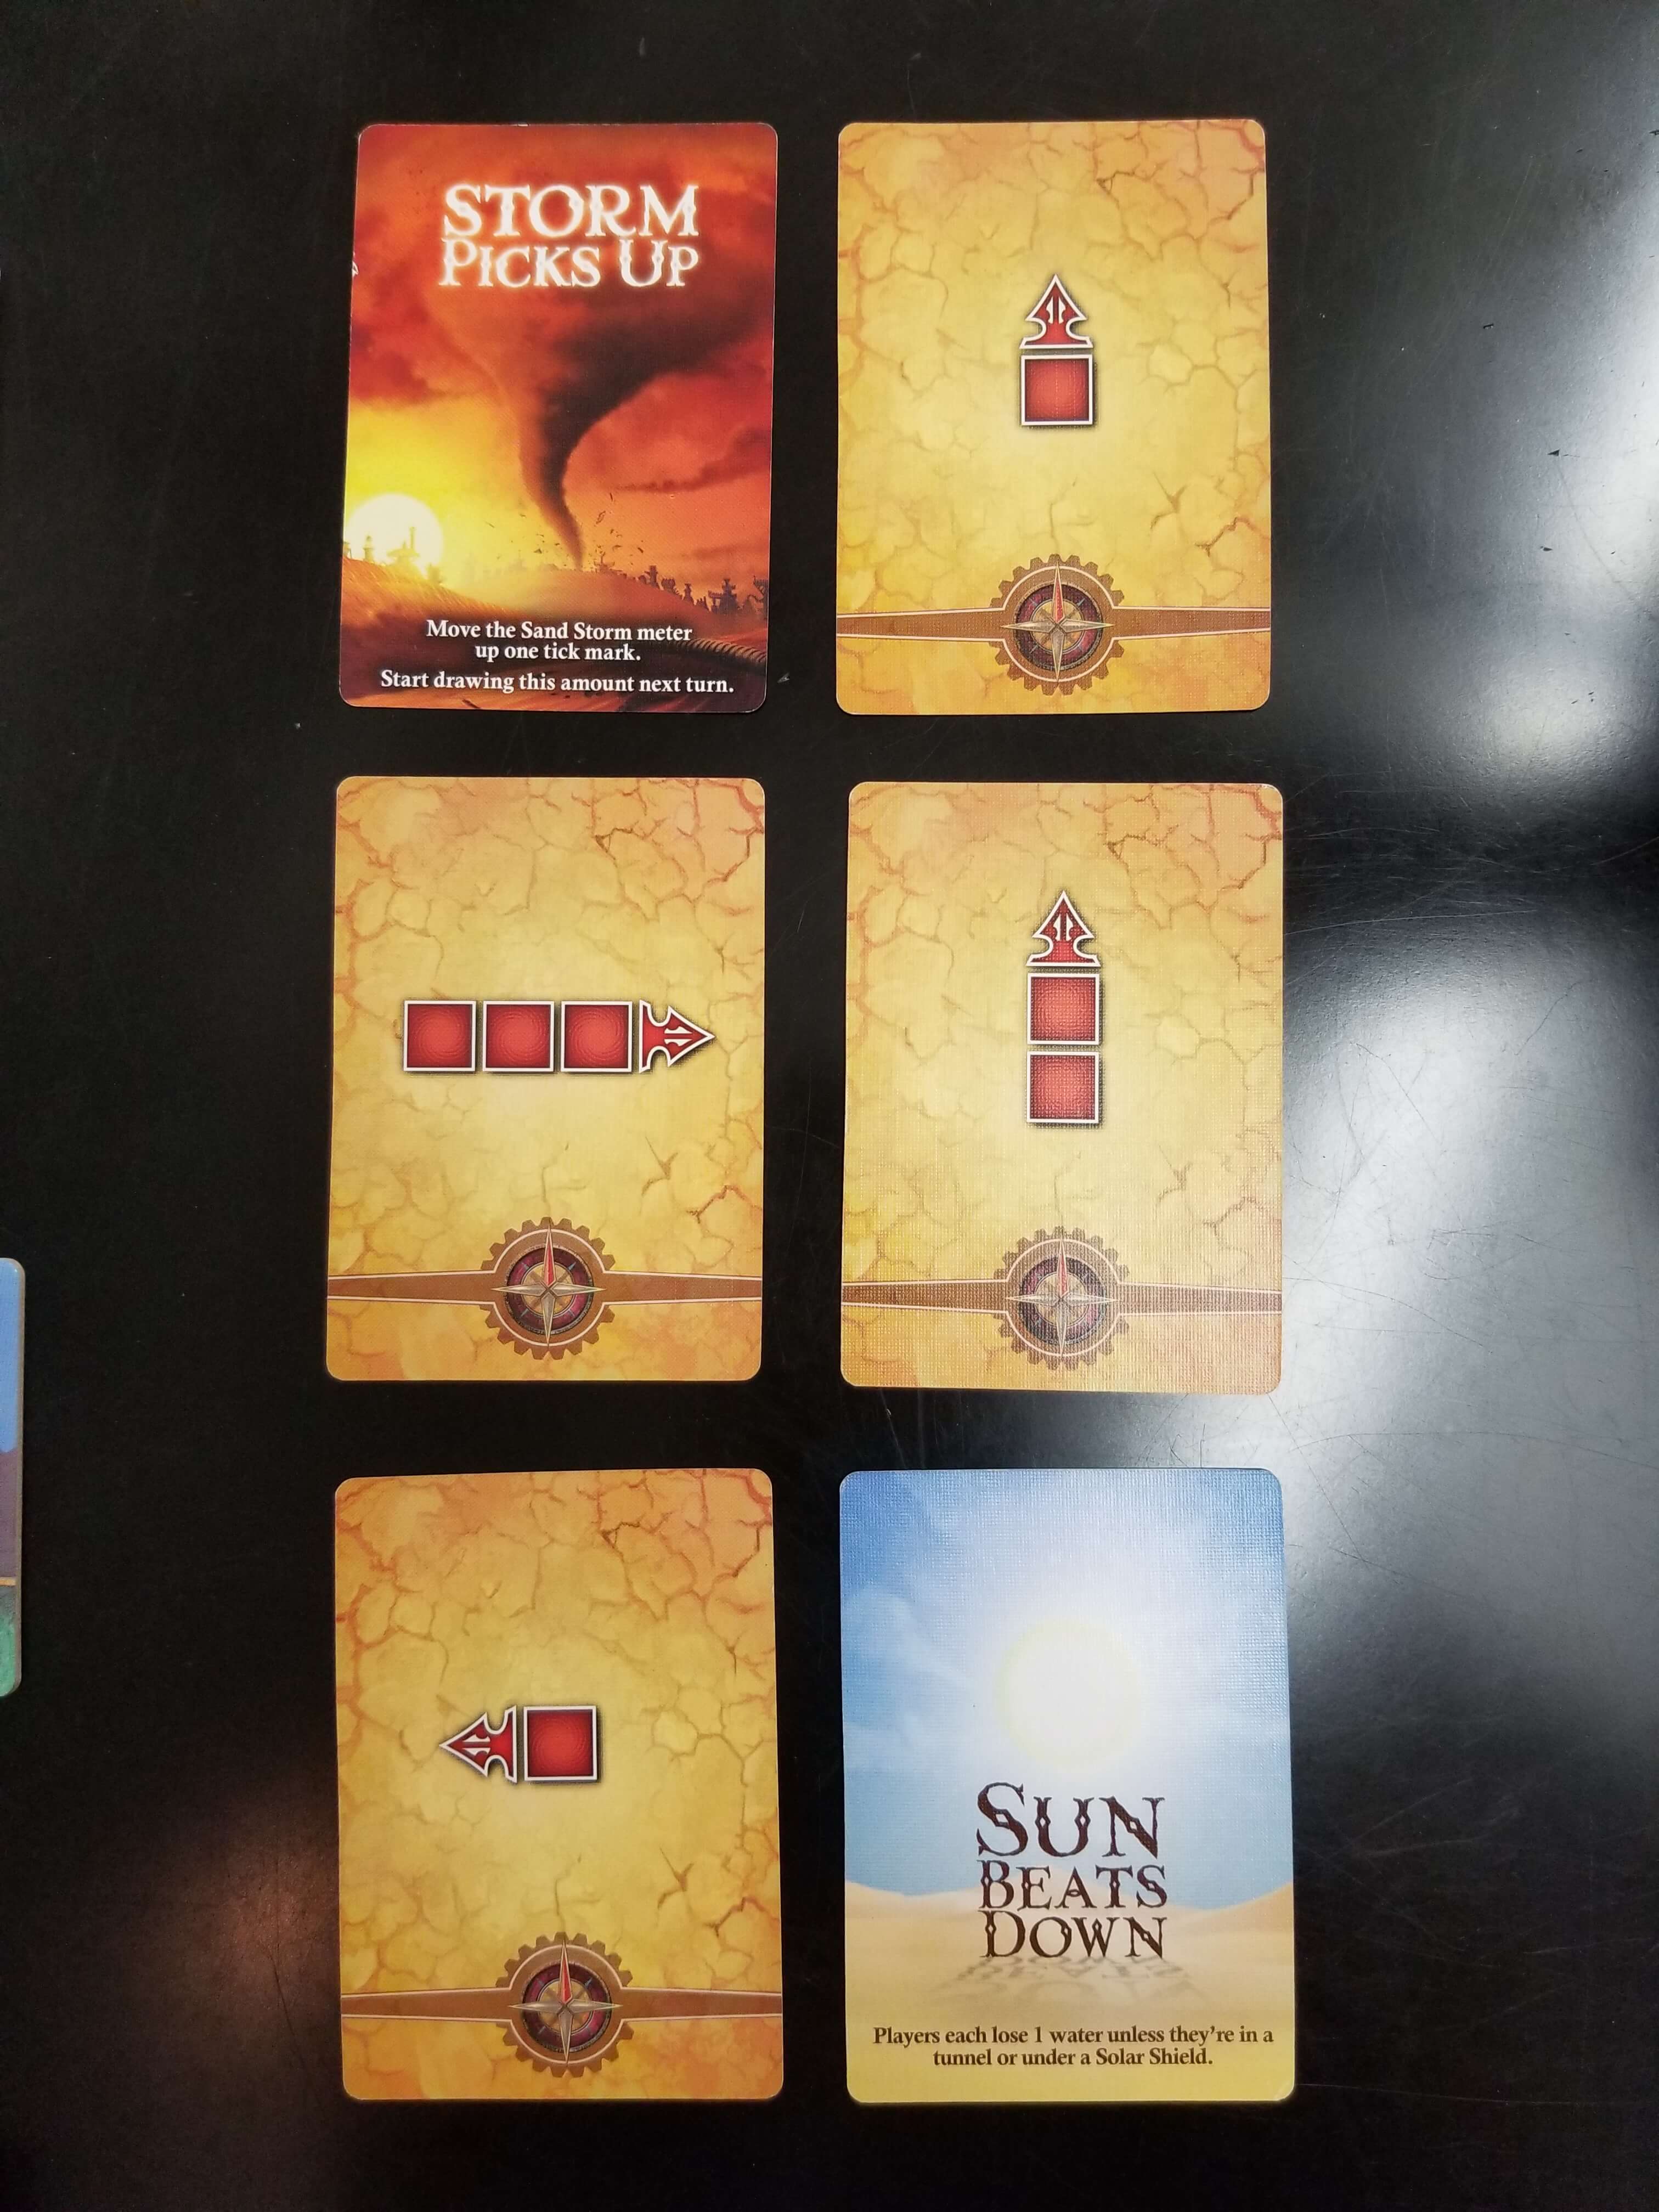 Forbidden Island vs Desert vs Sky: Which is Right for You?